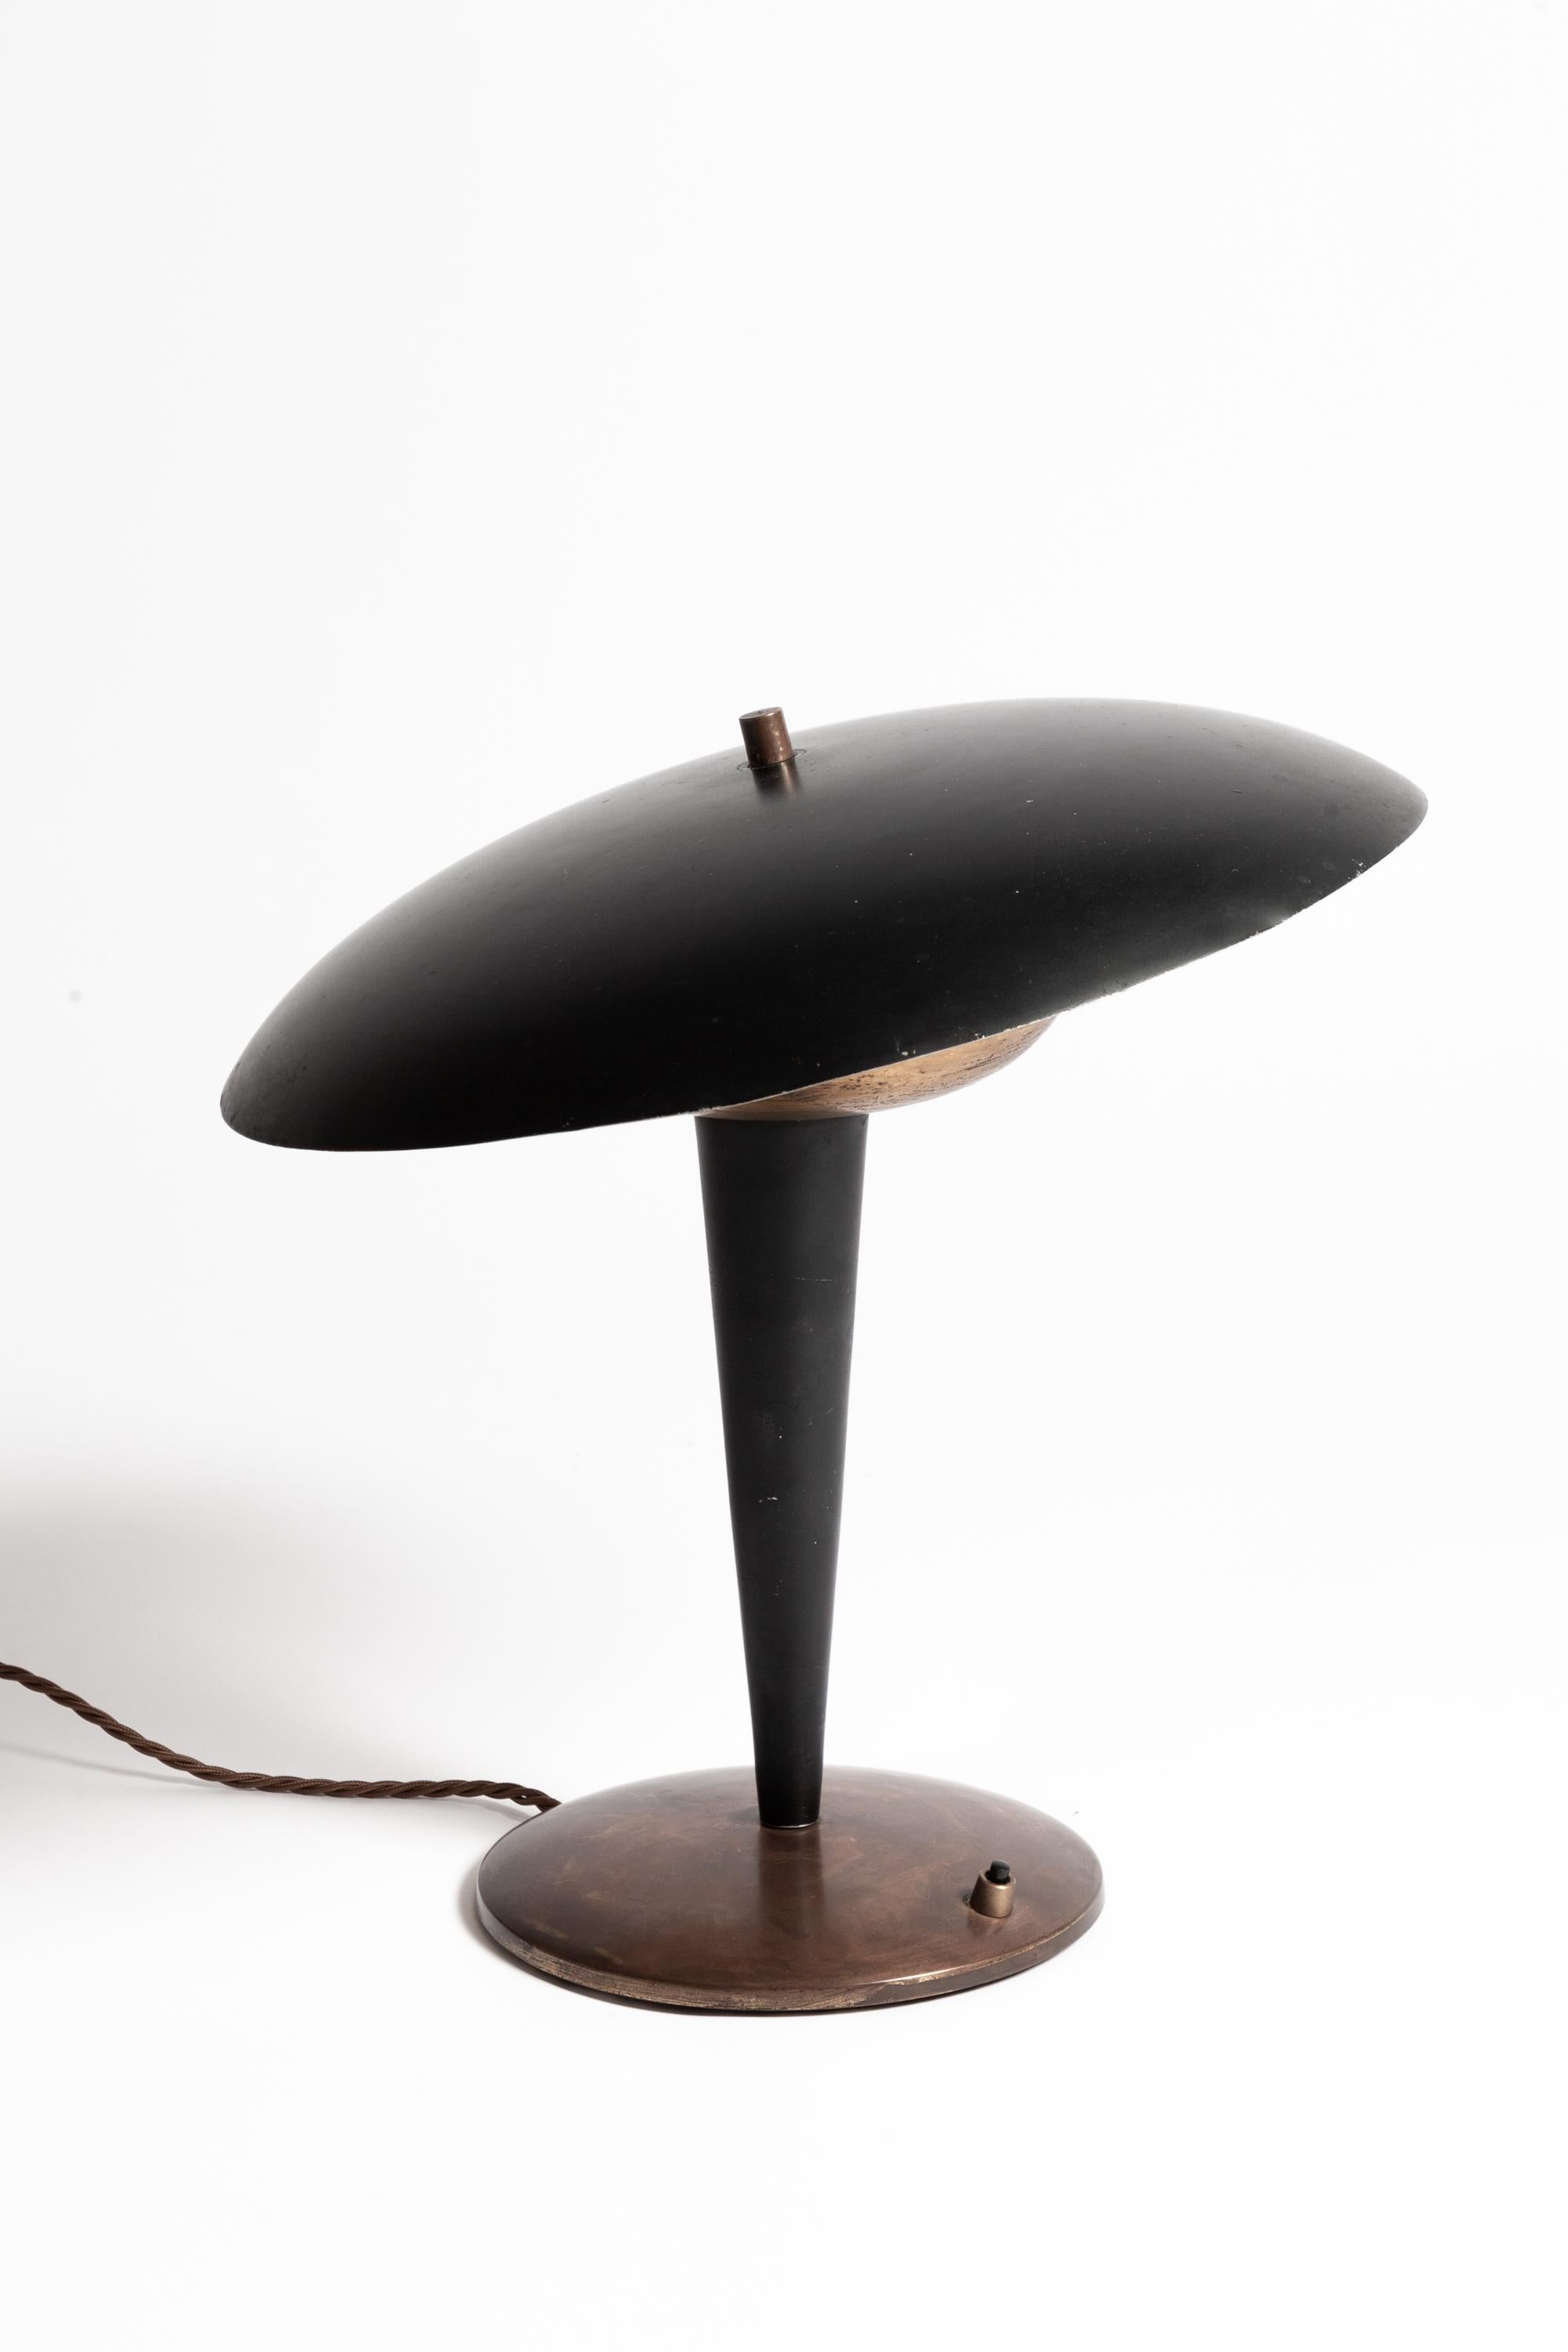 A 1960s Italian Desk Lamp. The domed shade is fully adjustable and casts a very nice down-light.

Lovely overall patina. Original black painted aluminium shade has minor age-associated scratches and marks commensurate with age. The brass elements